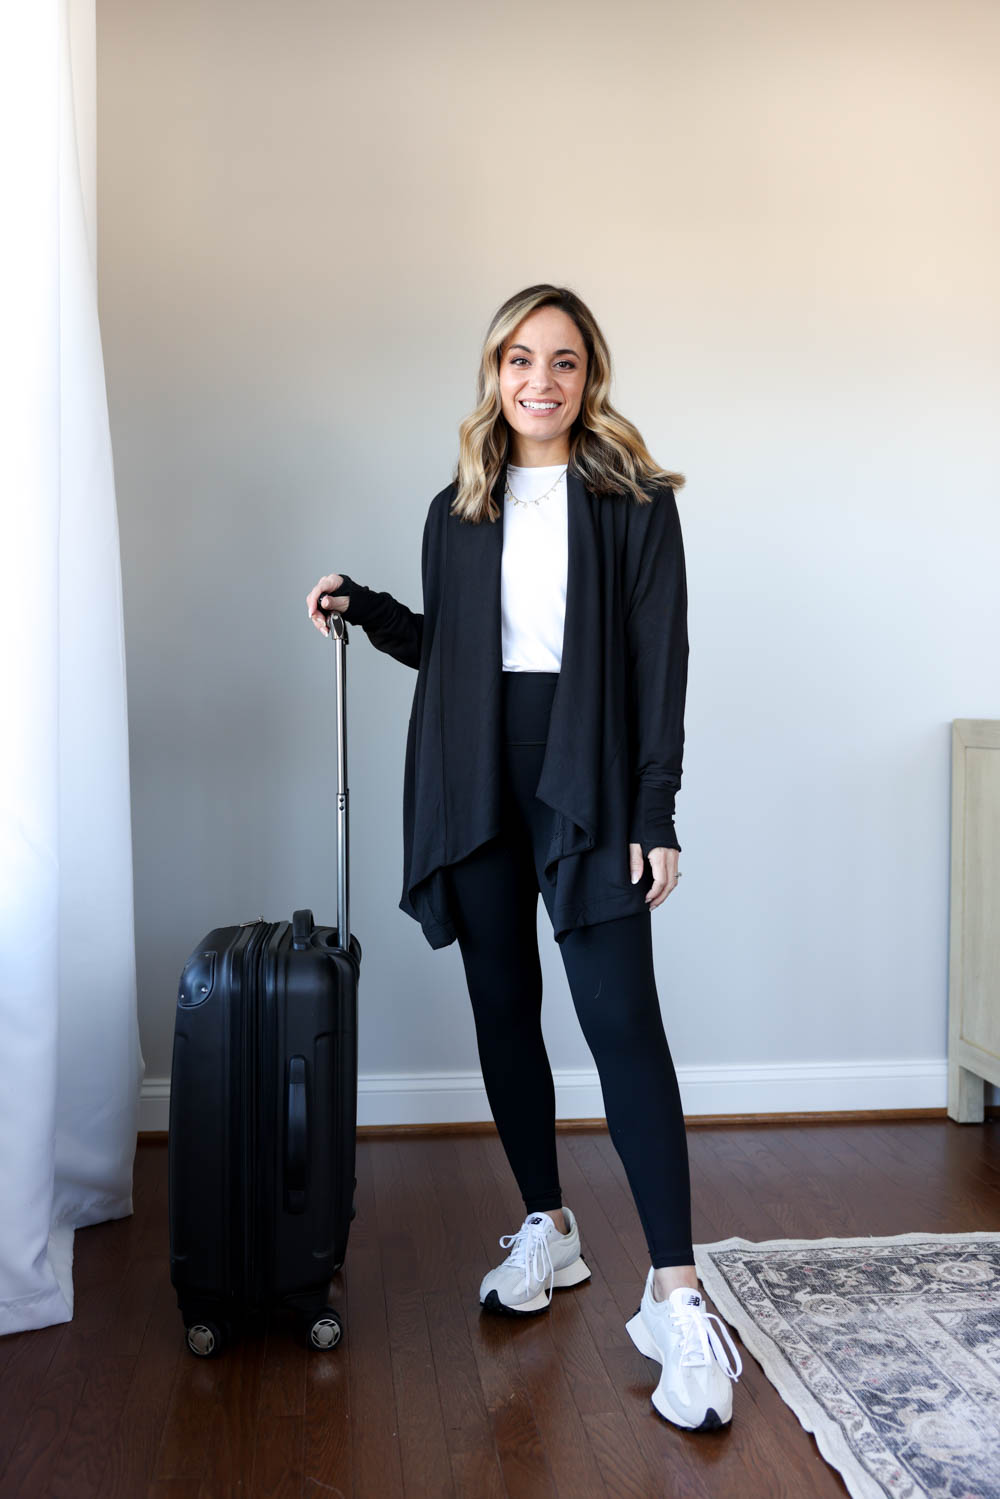 Winter Travel Outfit Ideas - Pumps & Push Ups